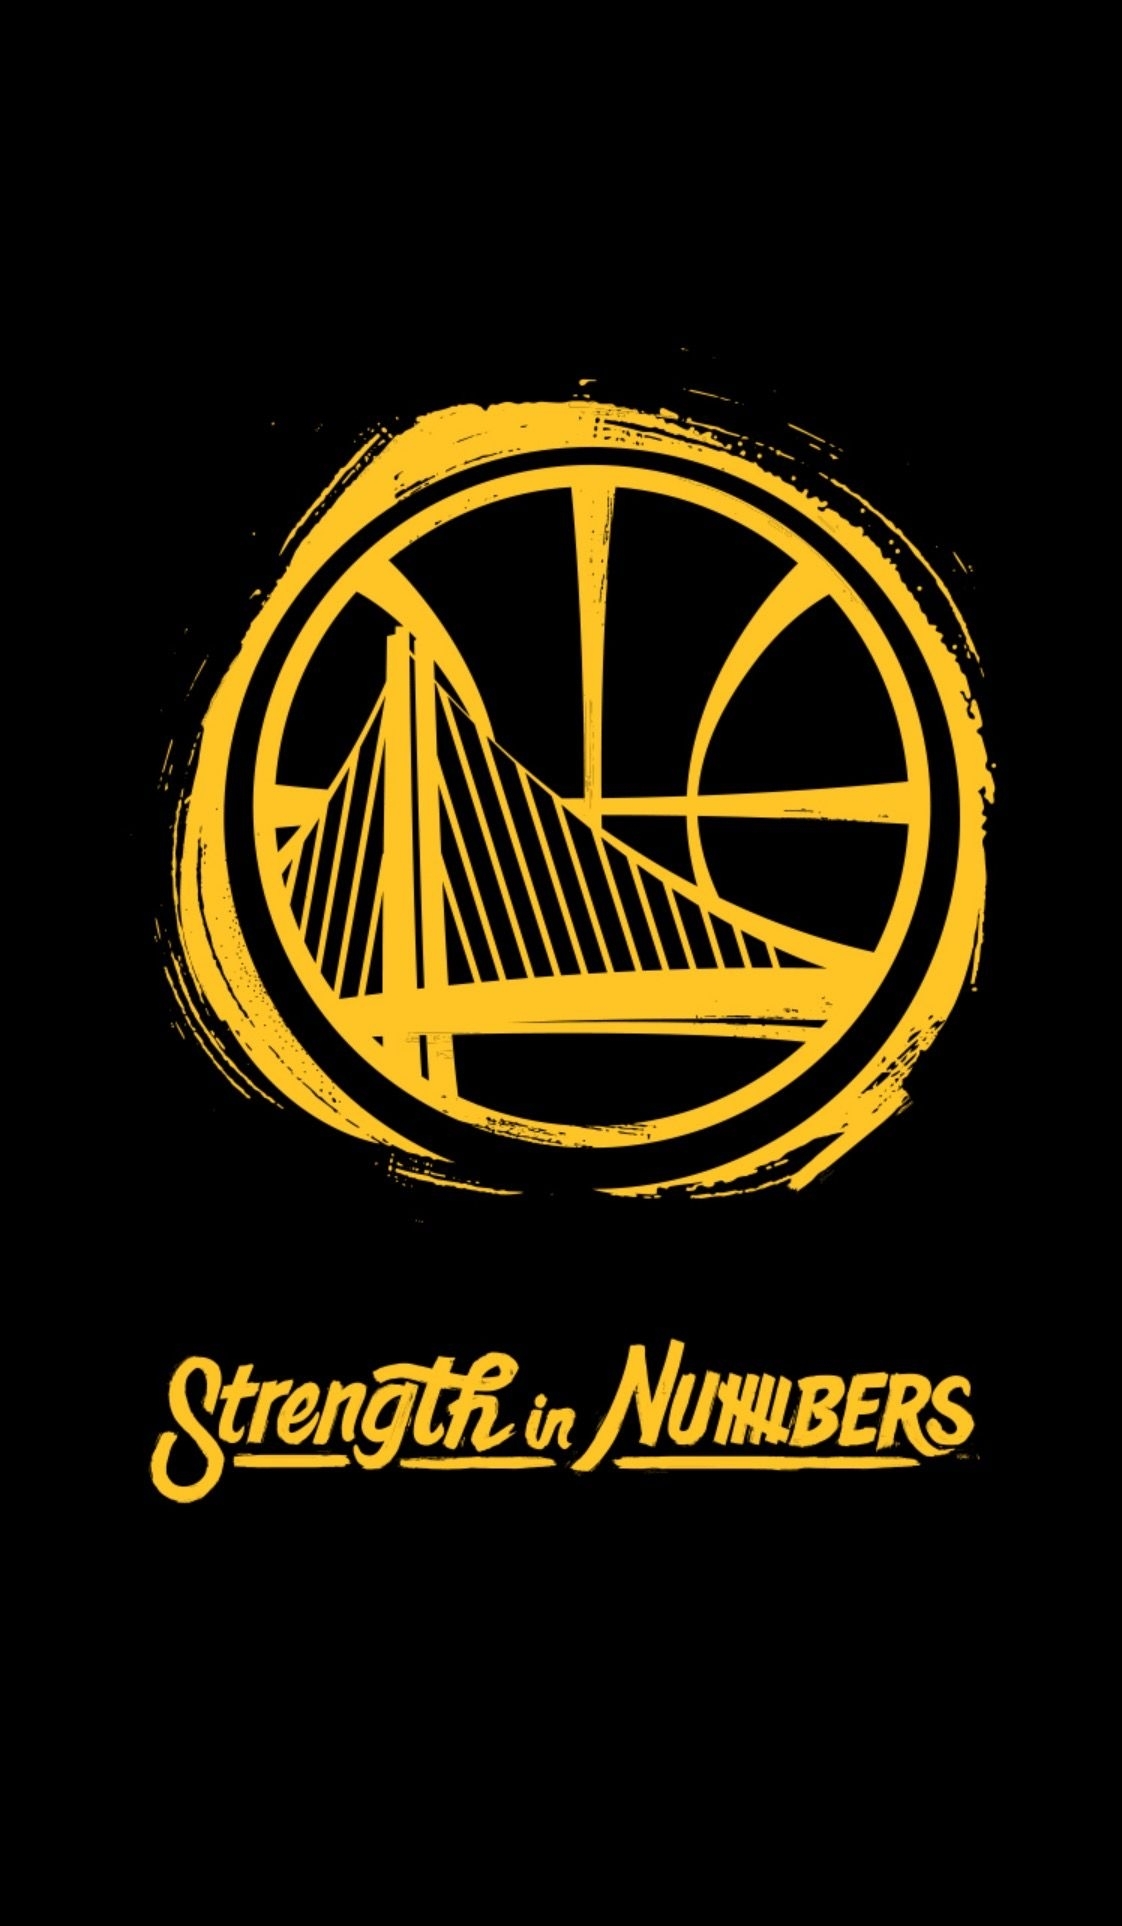 10 Top Golden State Warriors Mobile Wallpaper FULL HD 1920×1080 For PC Background